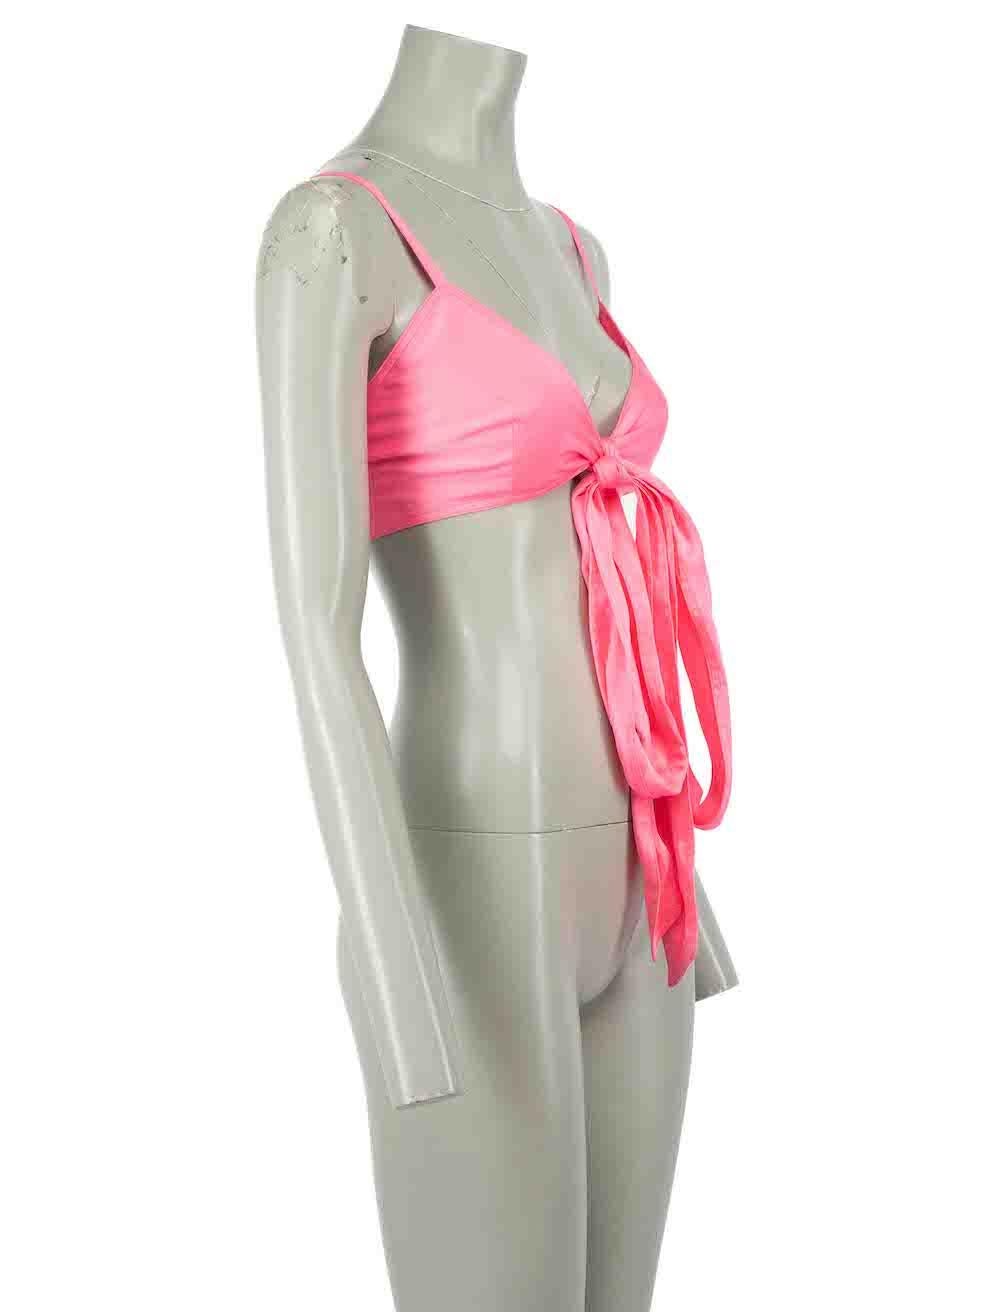 CONDITION is Never worn, with tags. No visible wear to top is evident on this new Palm Angels designer resale item.
 
 Details
 Pink
 Polyester
 Cropped top
 Sleeveless
 Front tie strap closure
 Elasticated shirred back panel
 
 
 Made in Italy
 
